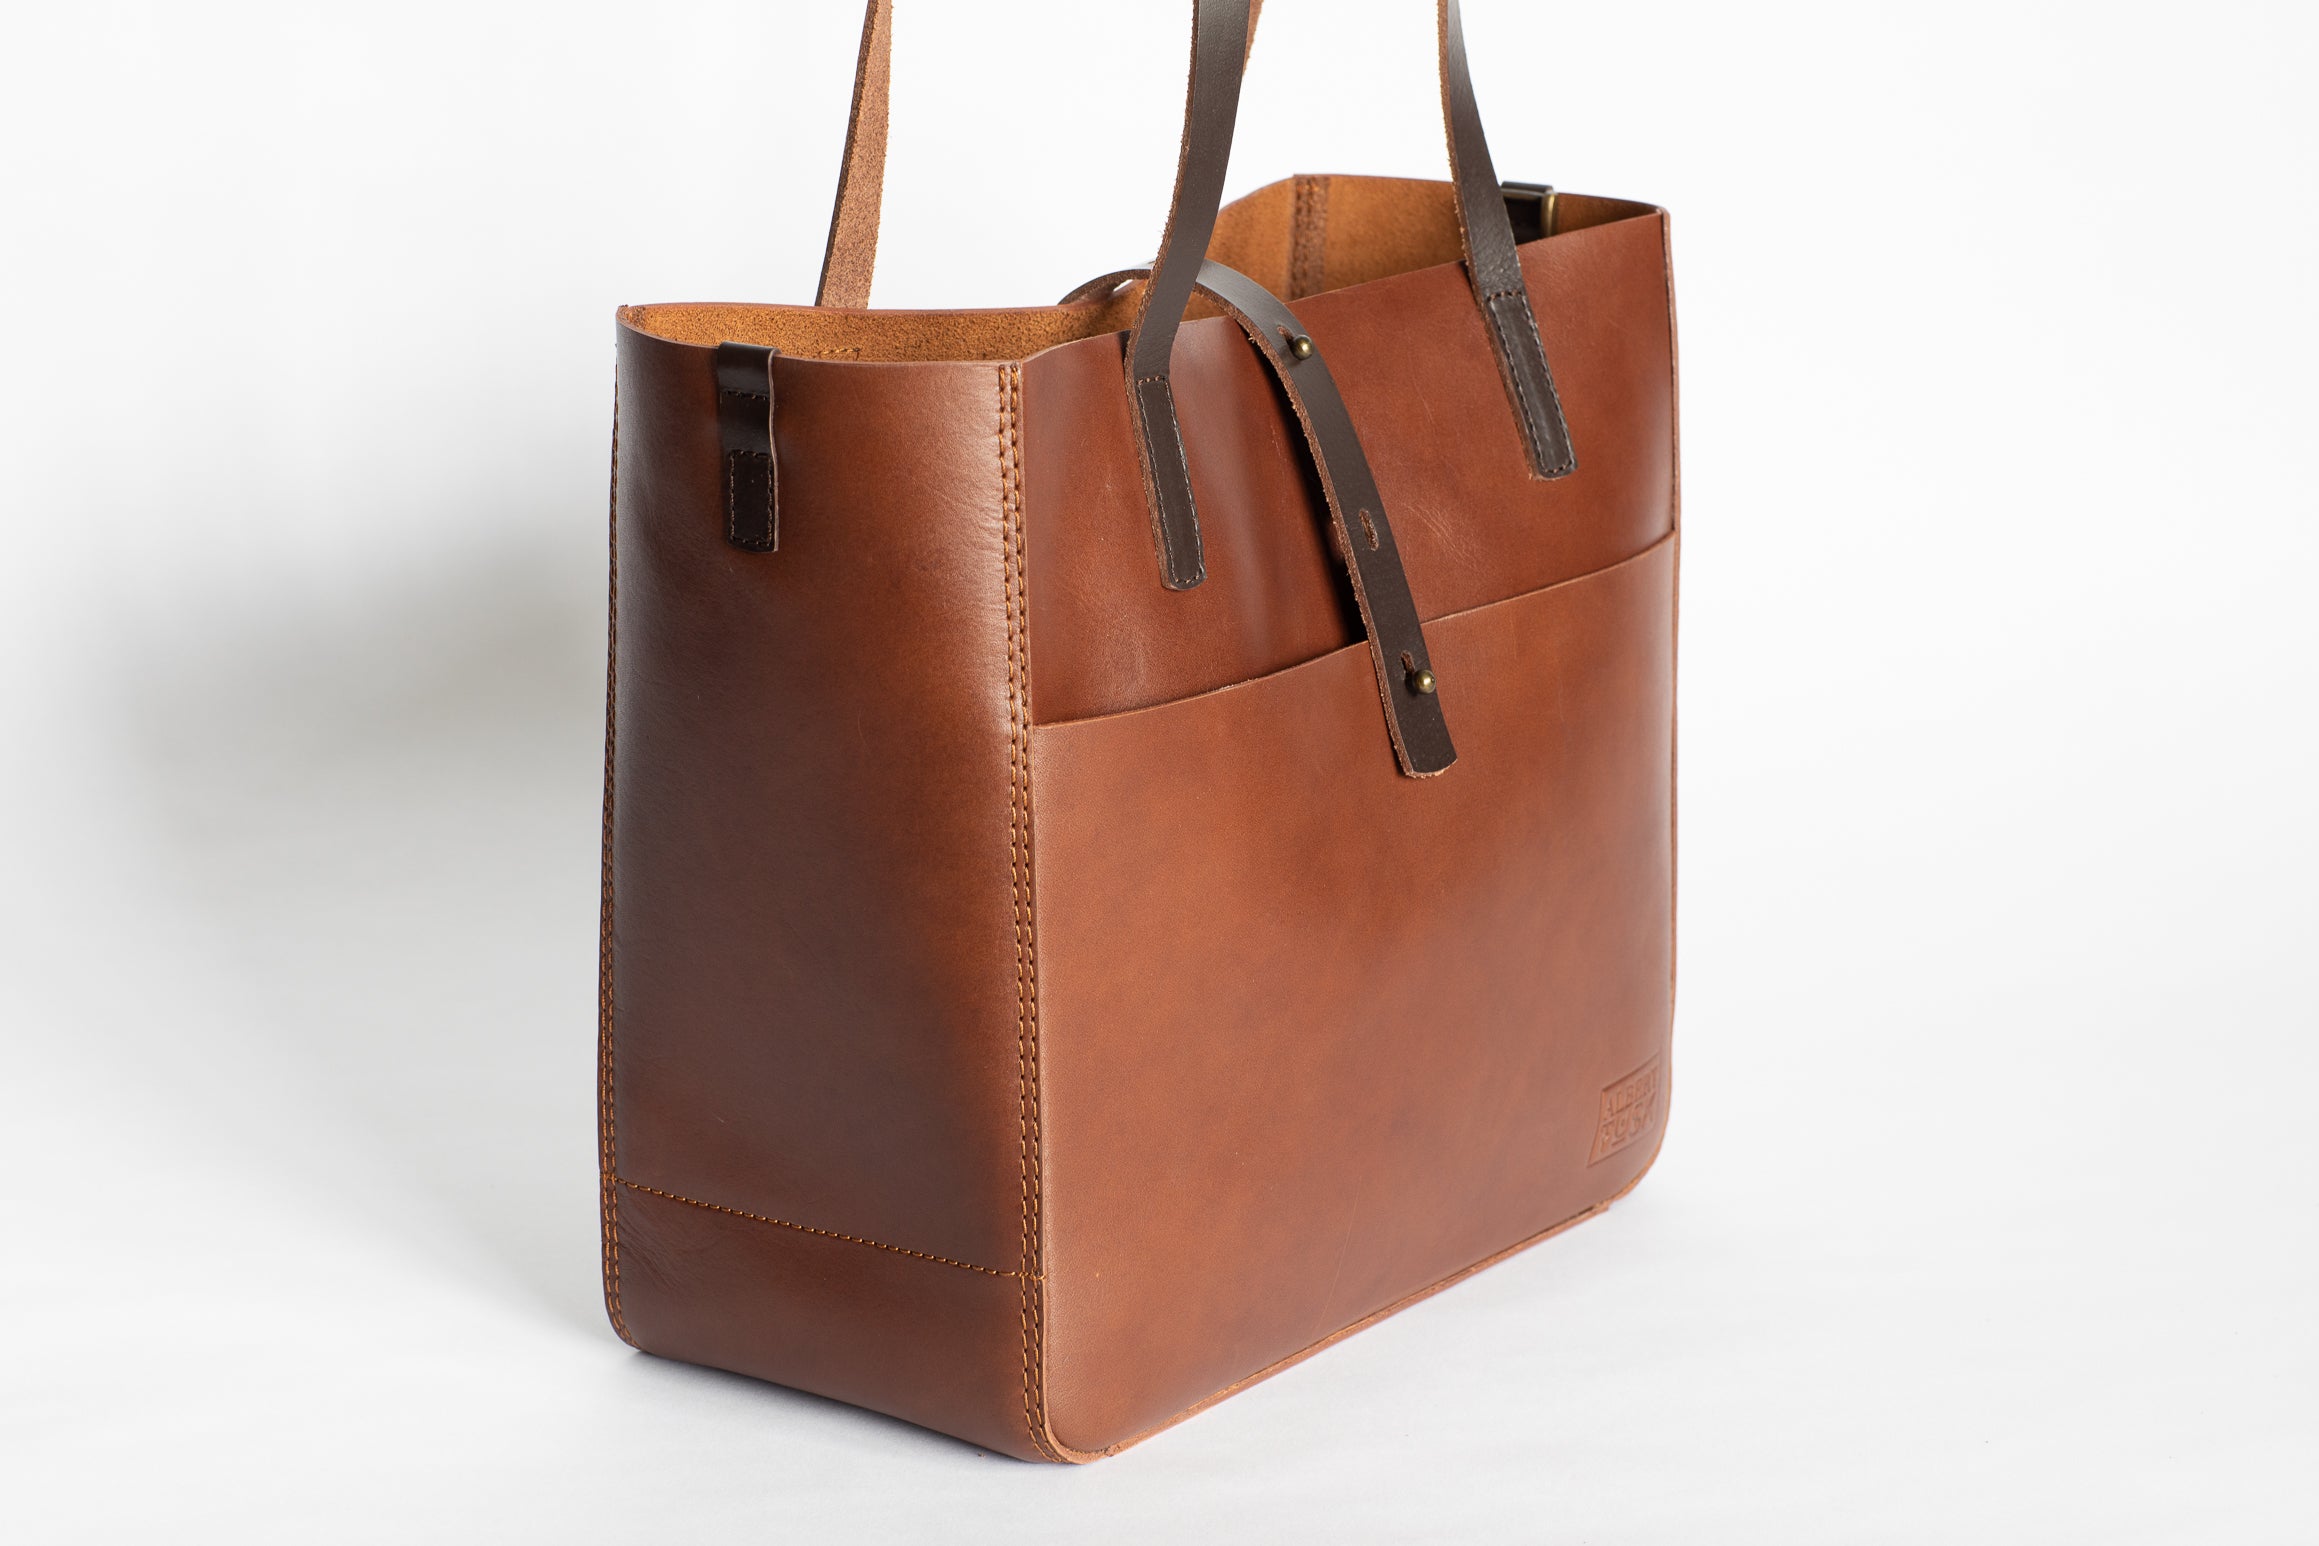 Buy Carryall Bag Online In India -  India